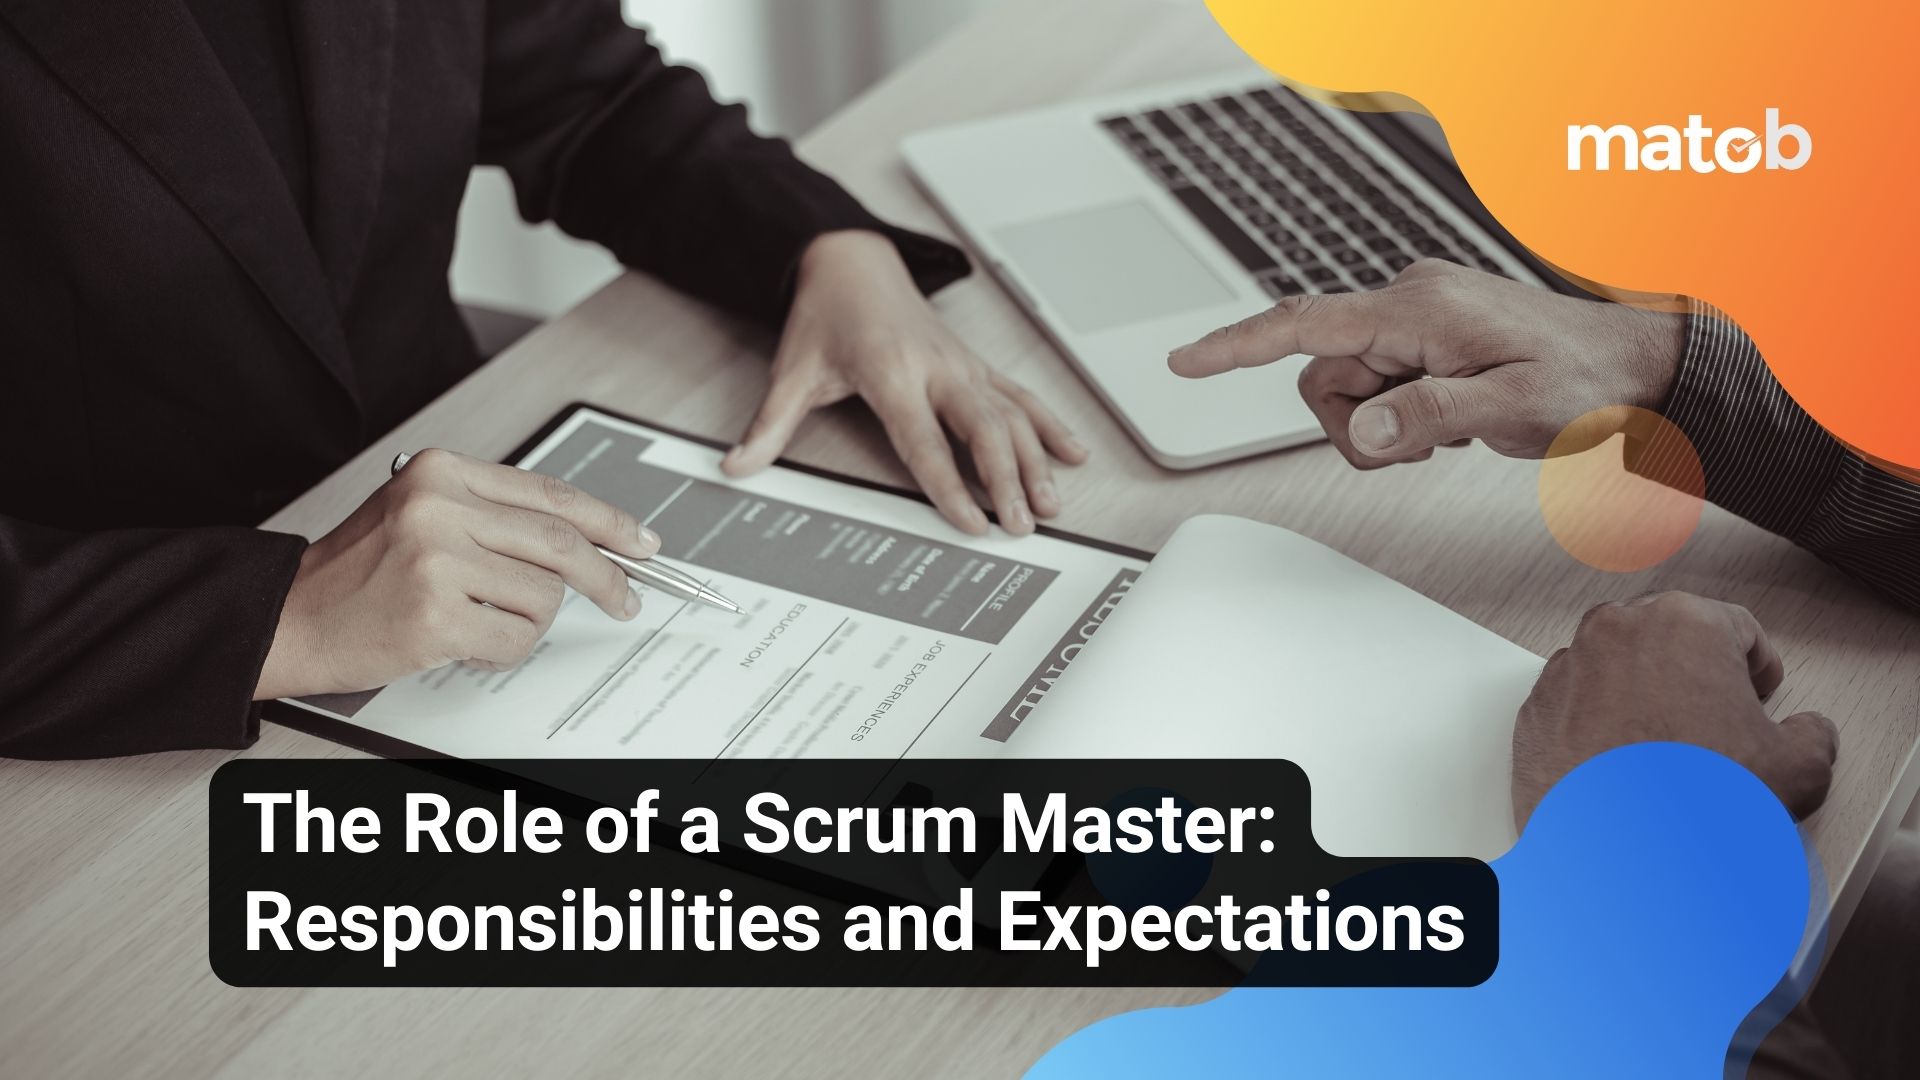 The Role of a Scrum Master: Responsibilities and Expectations